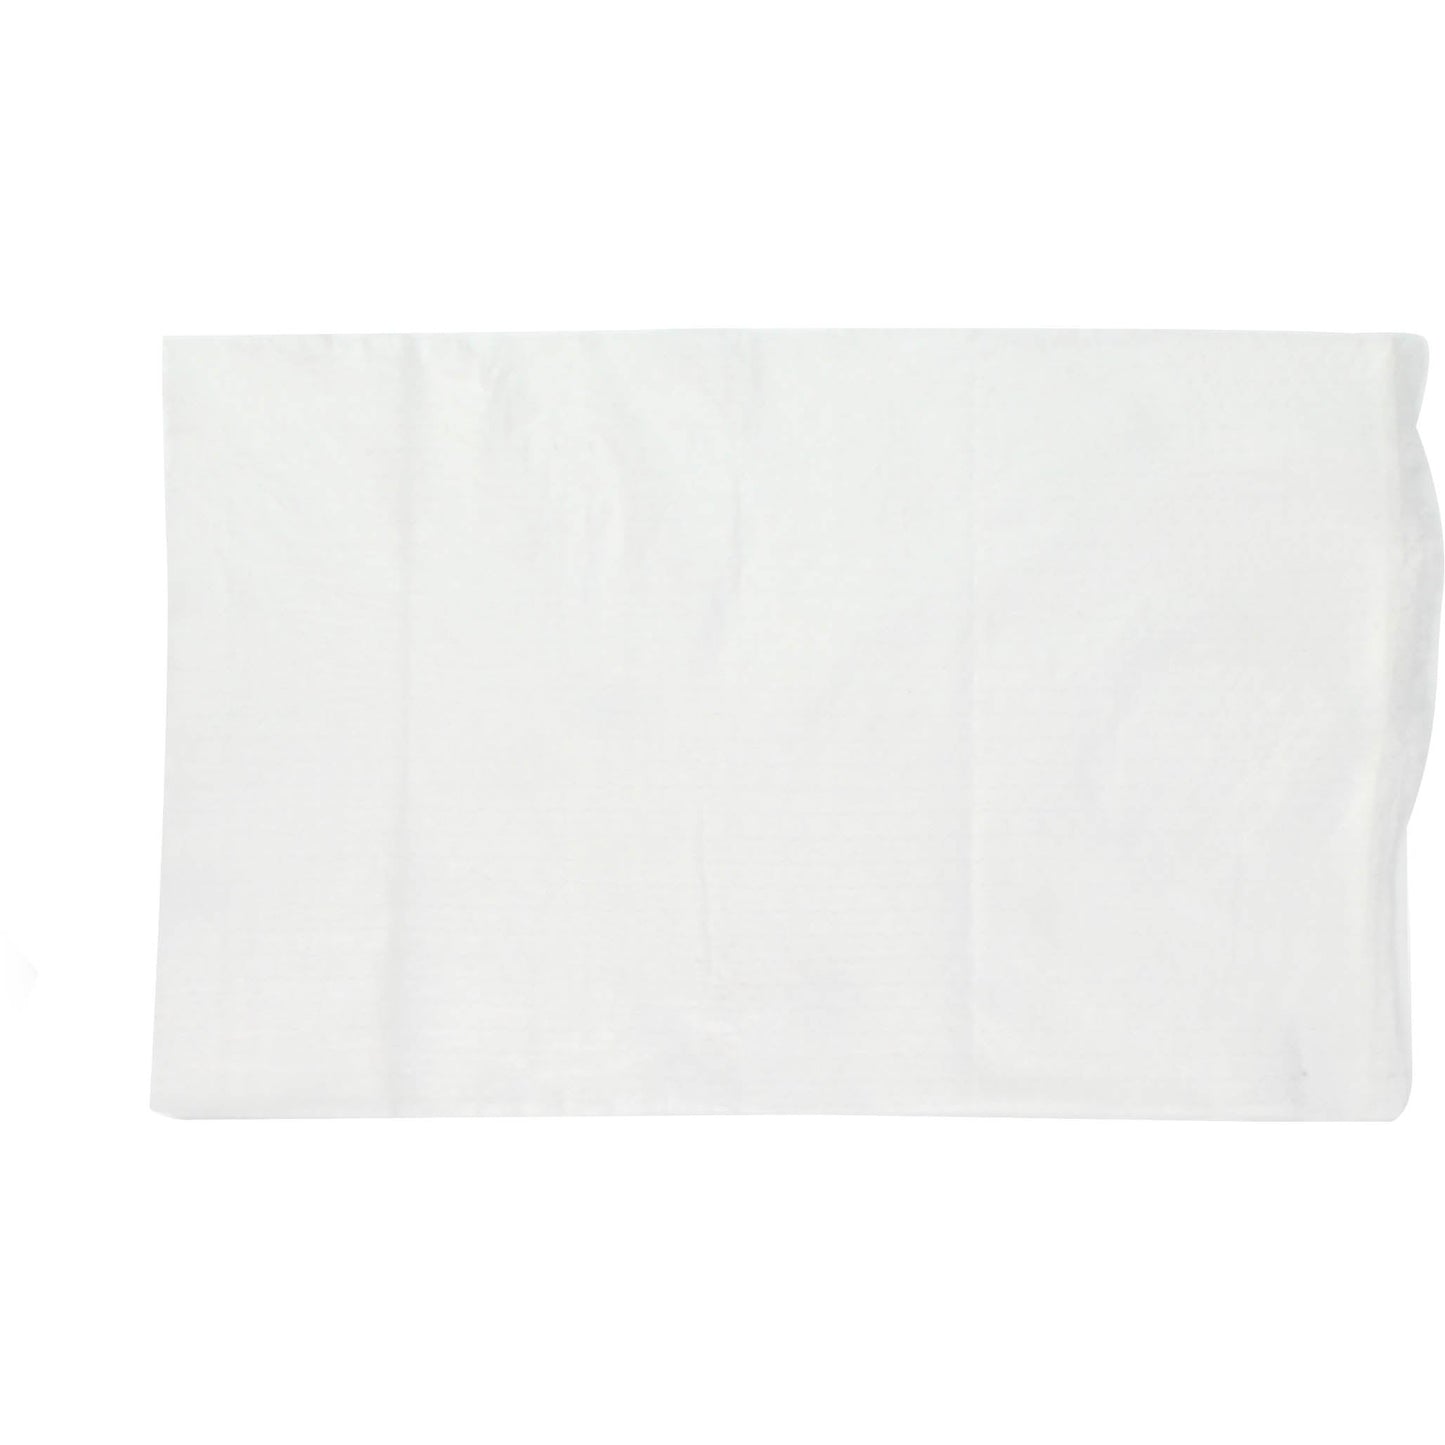 Alcohol Surface Wipes (70% IPA) - Pack of 70